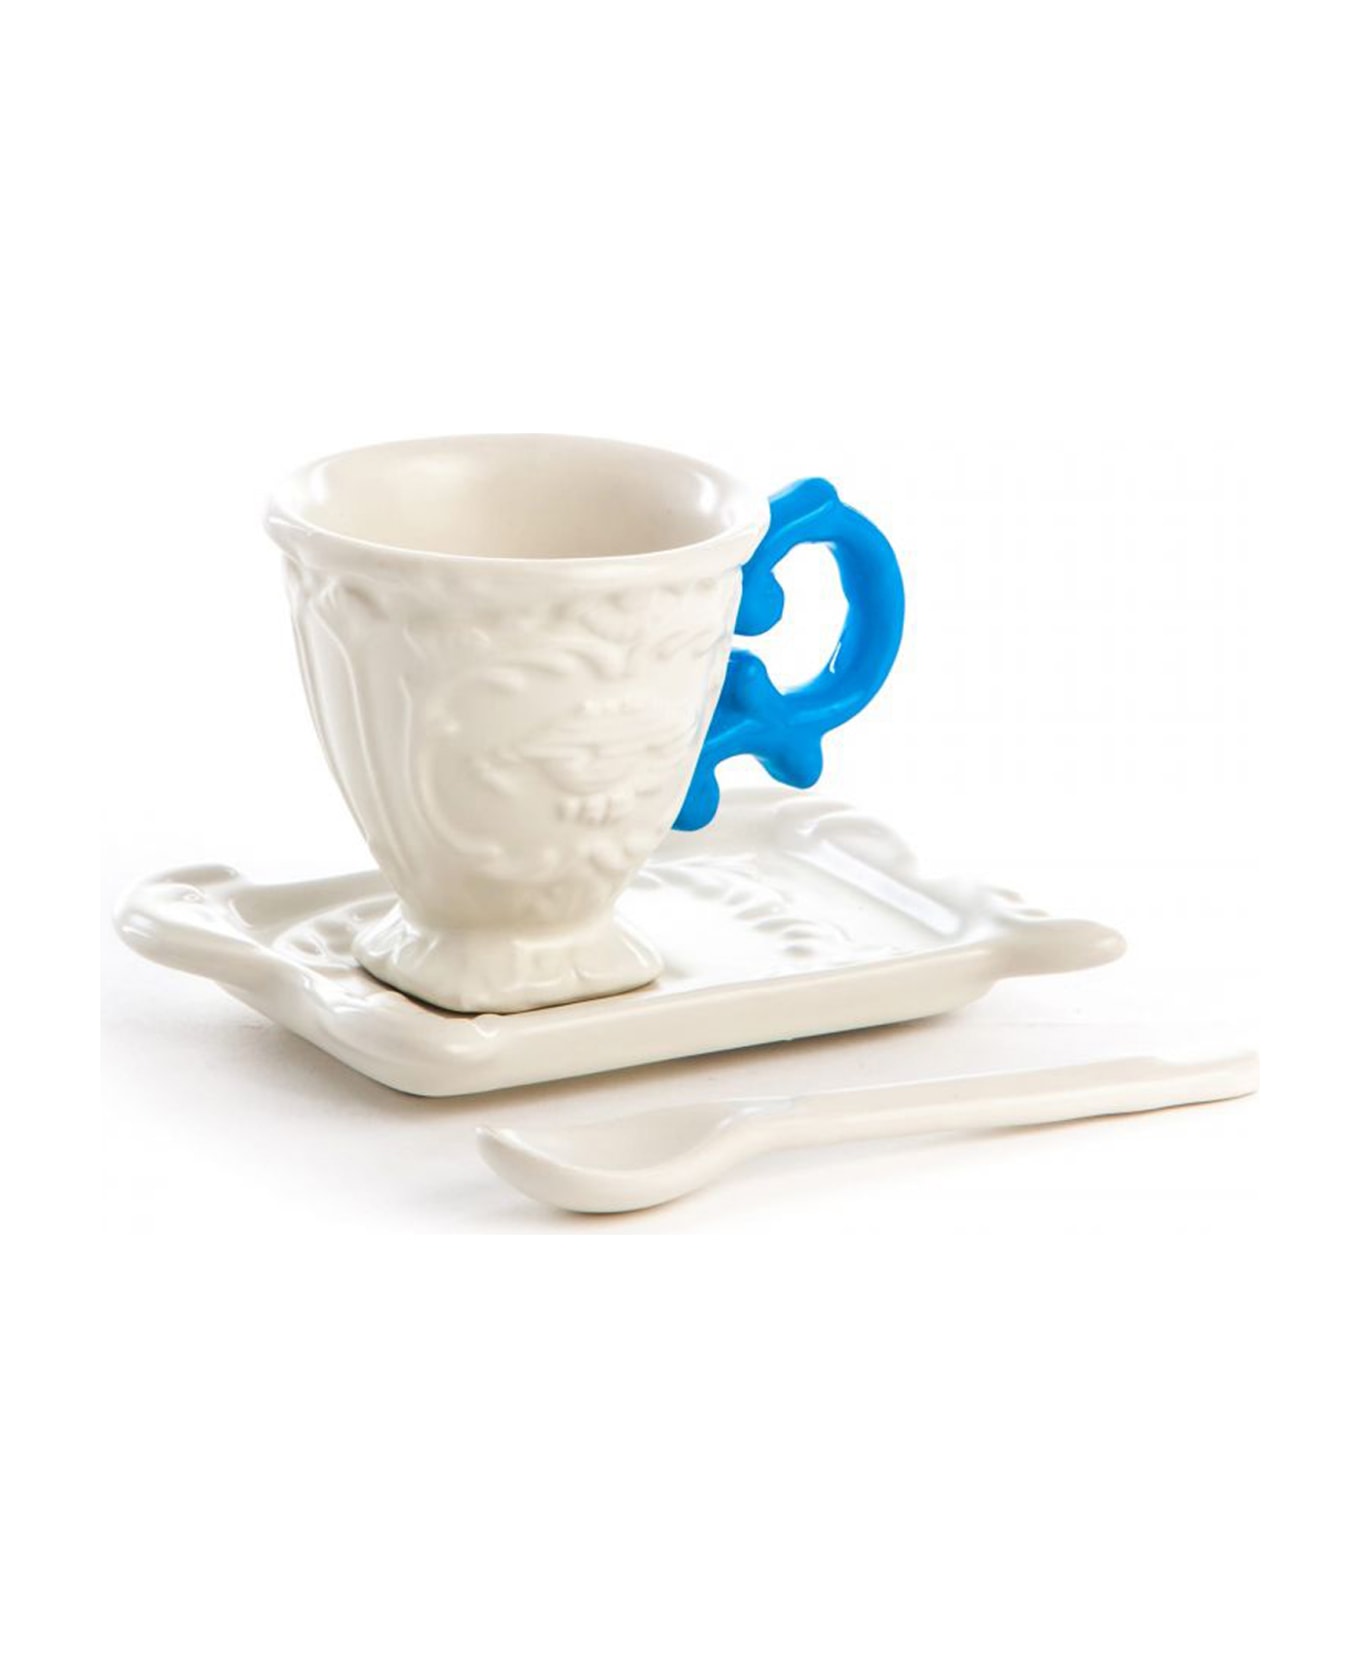 Seletti 'i-wares' Cup - Light Blue バーグッズ